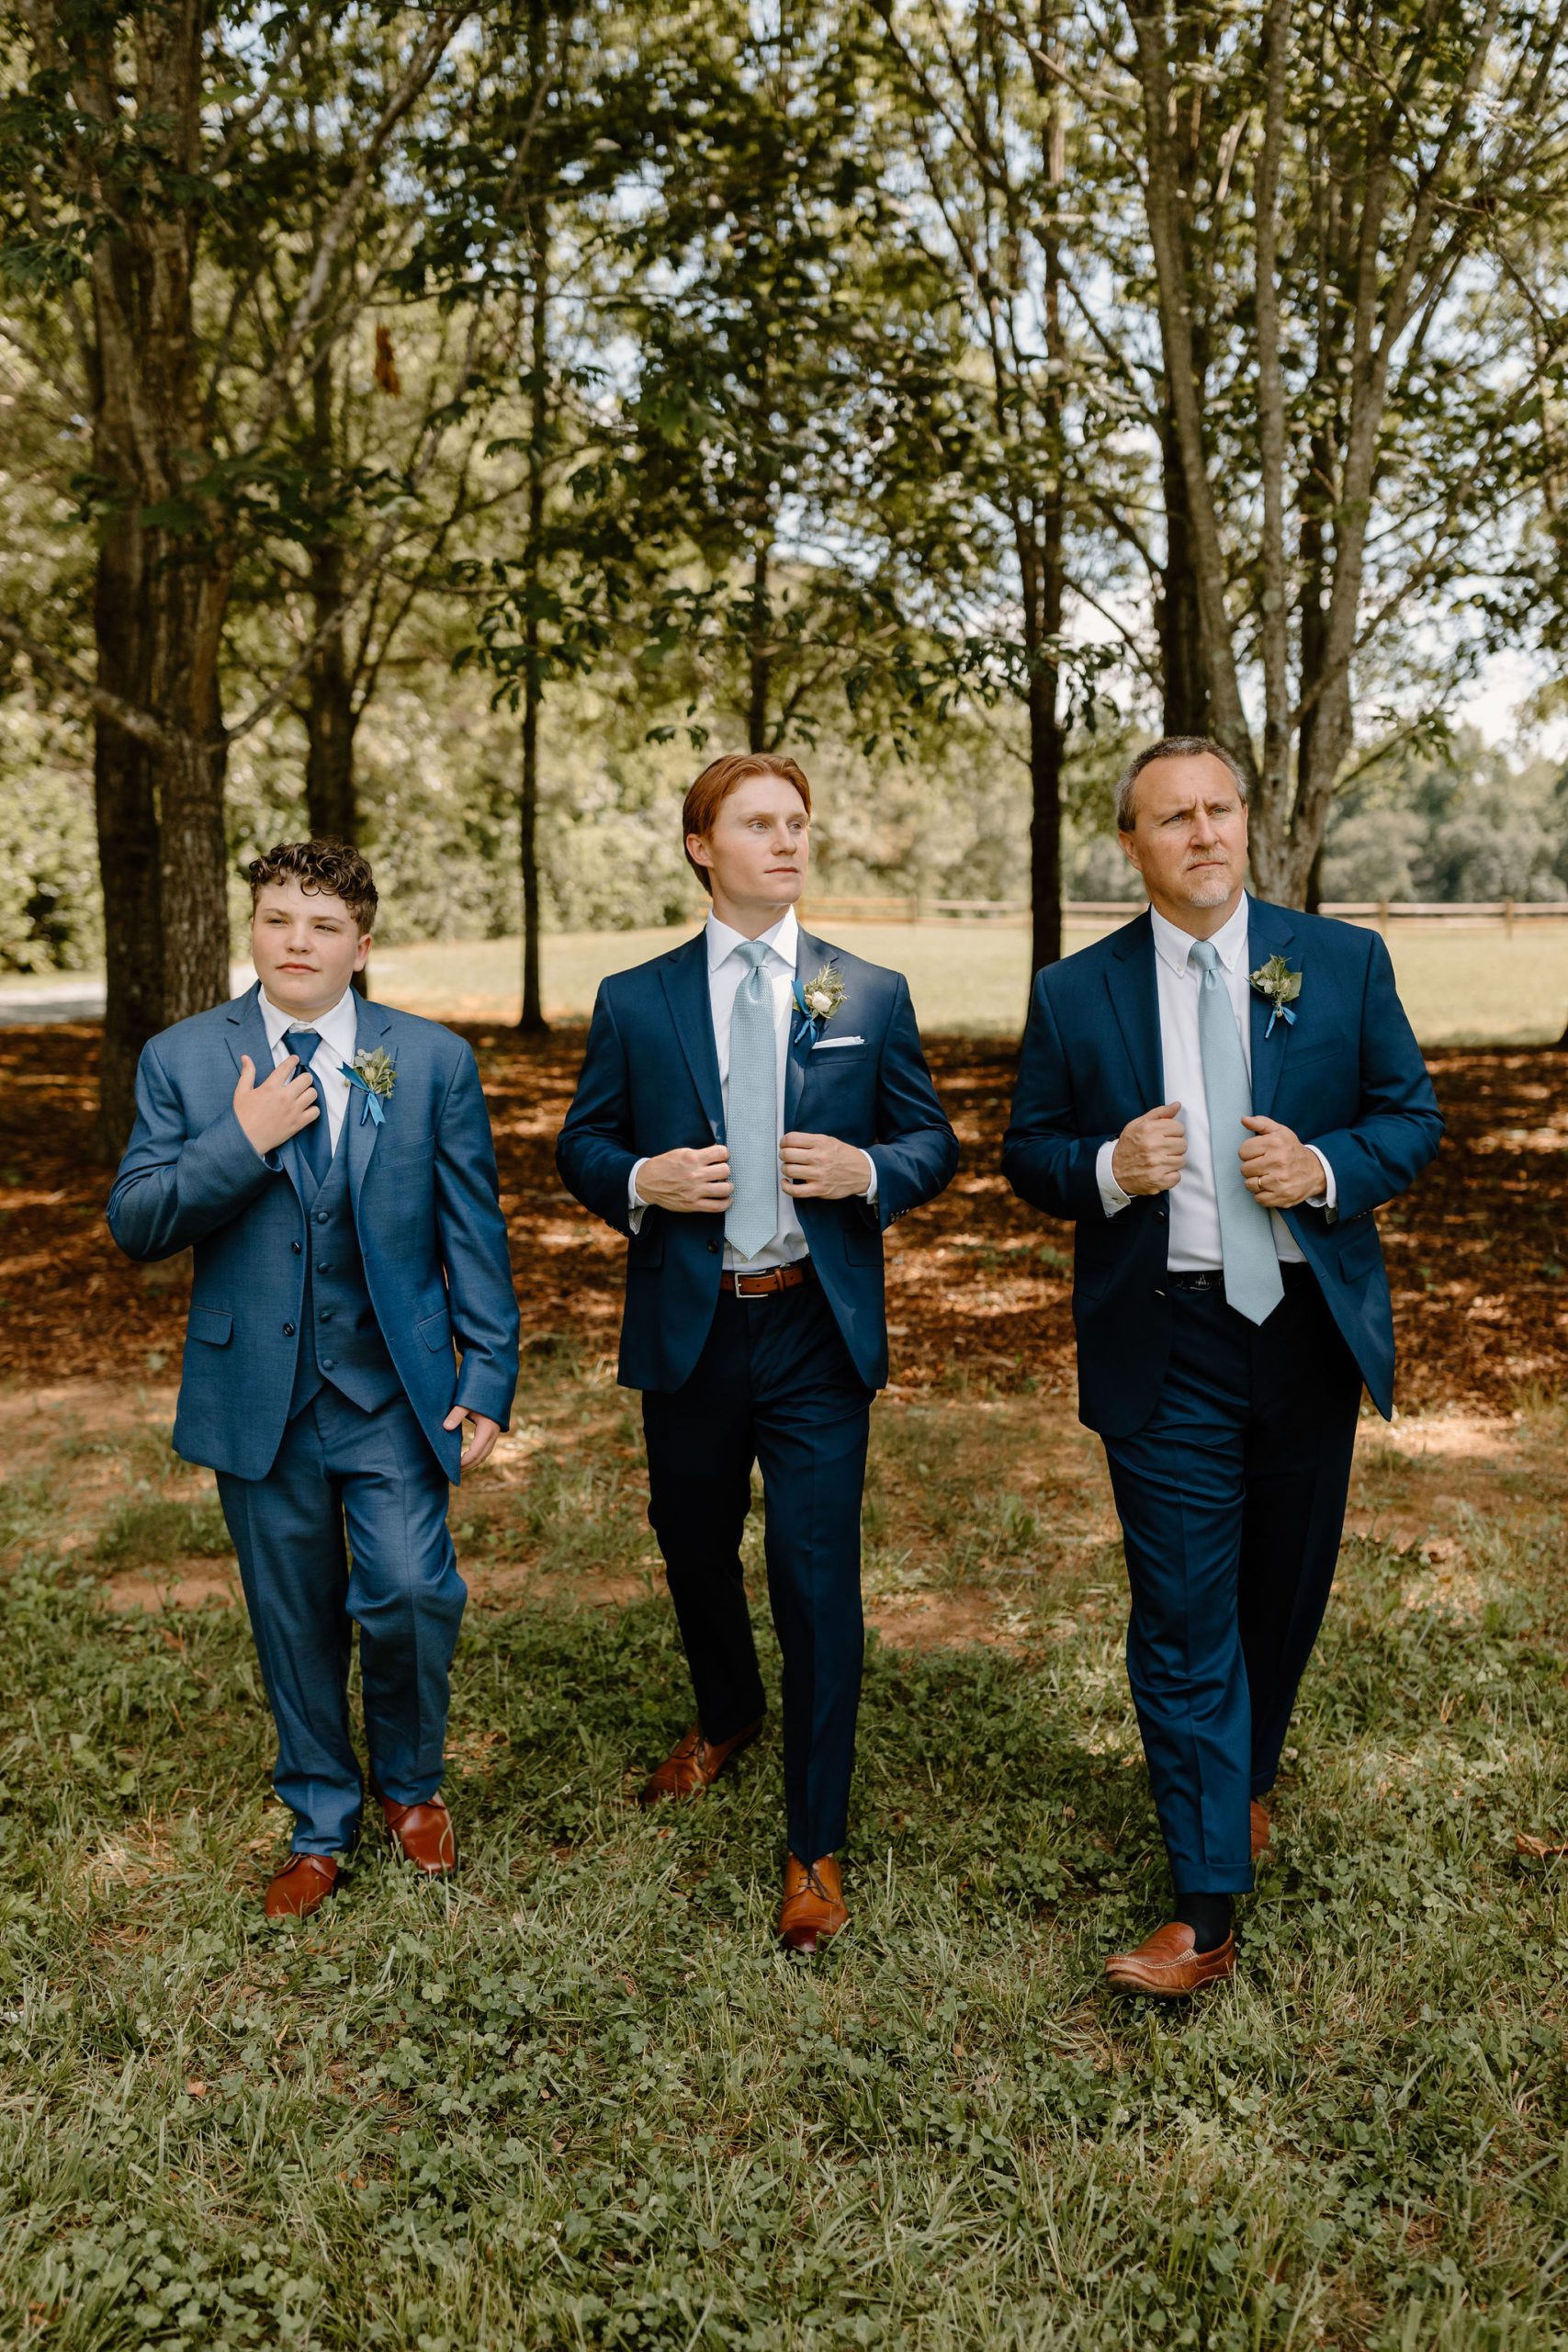 Long Acres Barn venue in Winston-Salem, North Carolina with beautiful decor and forest vibes in groomsmen photos